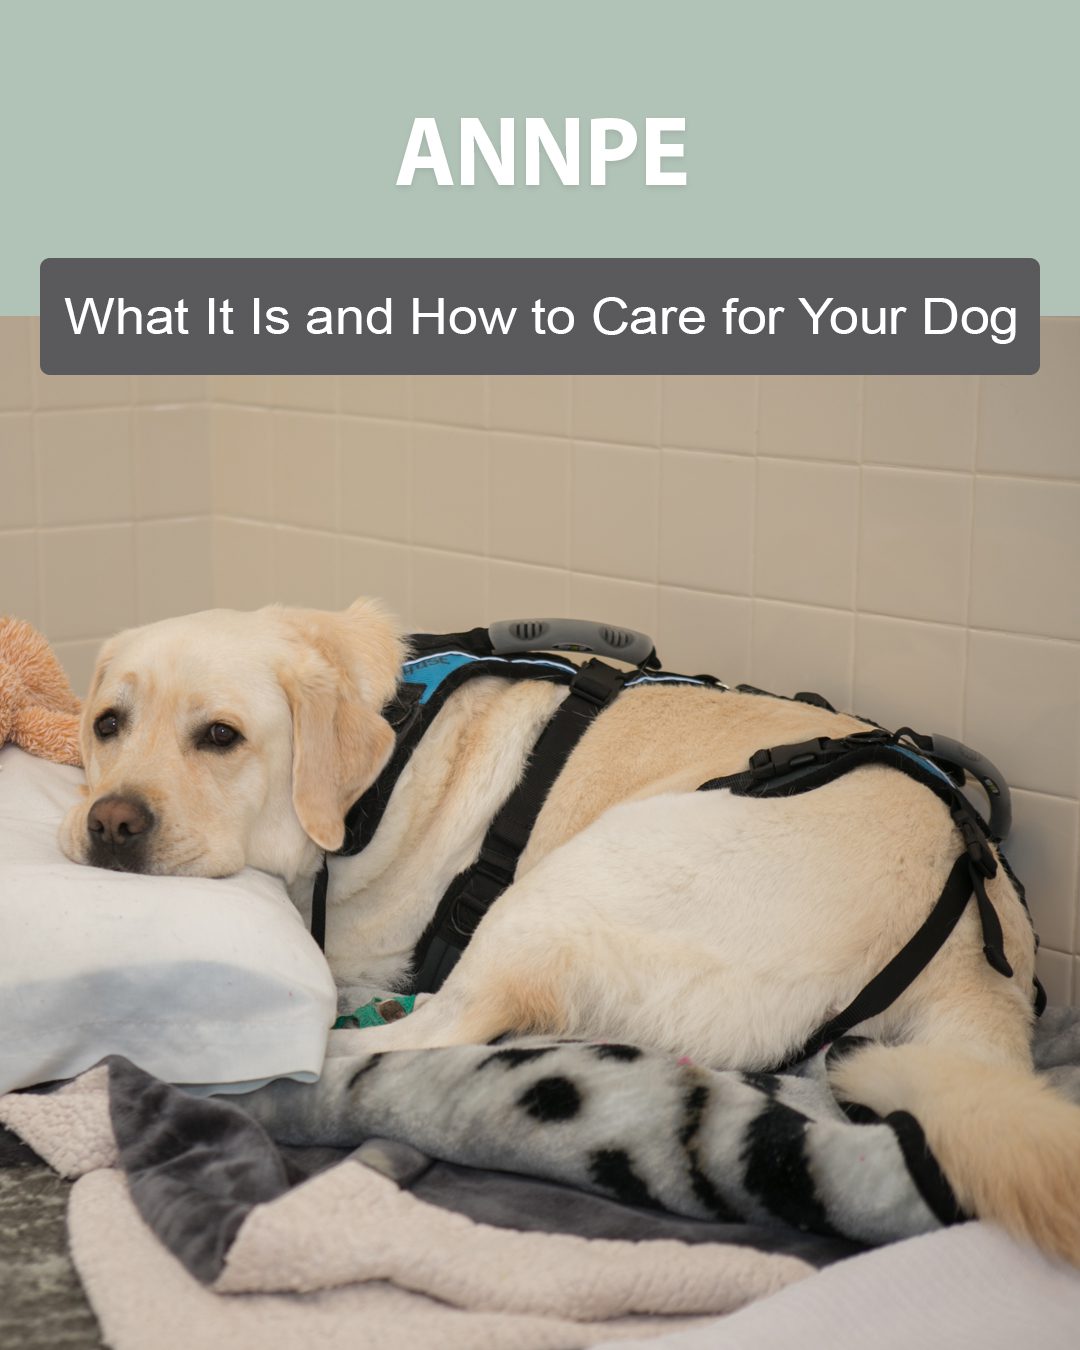 ANNPE: What It Is and How to Care for Your Dog